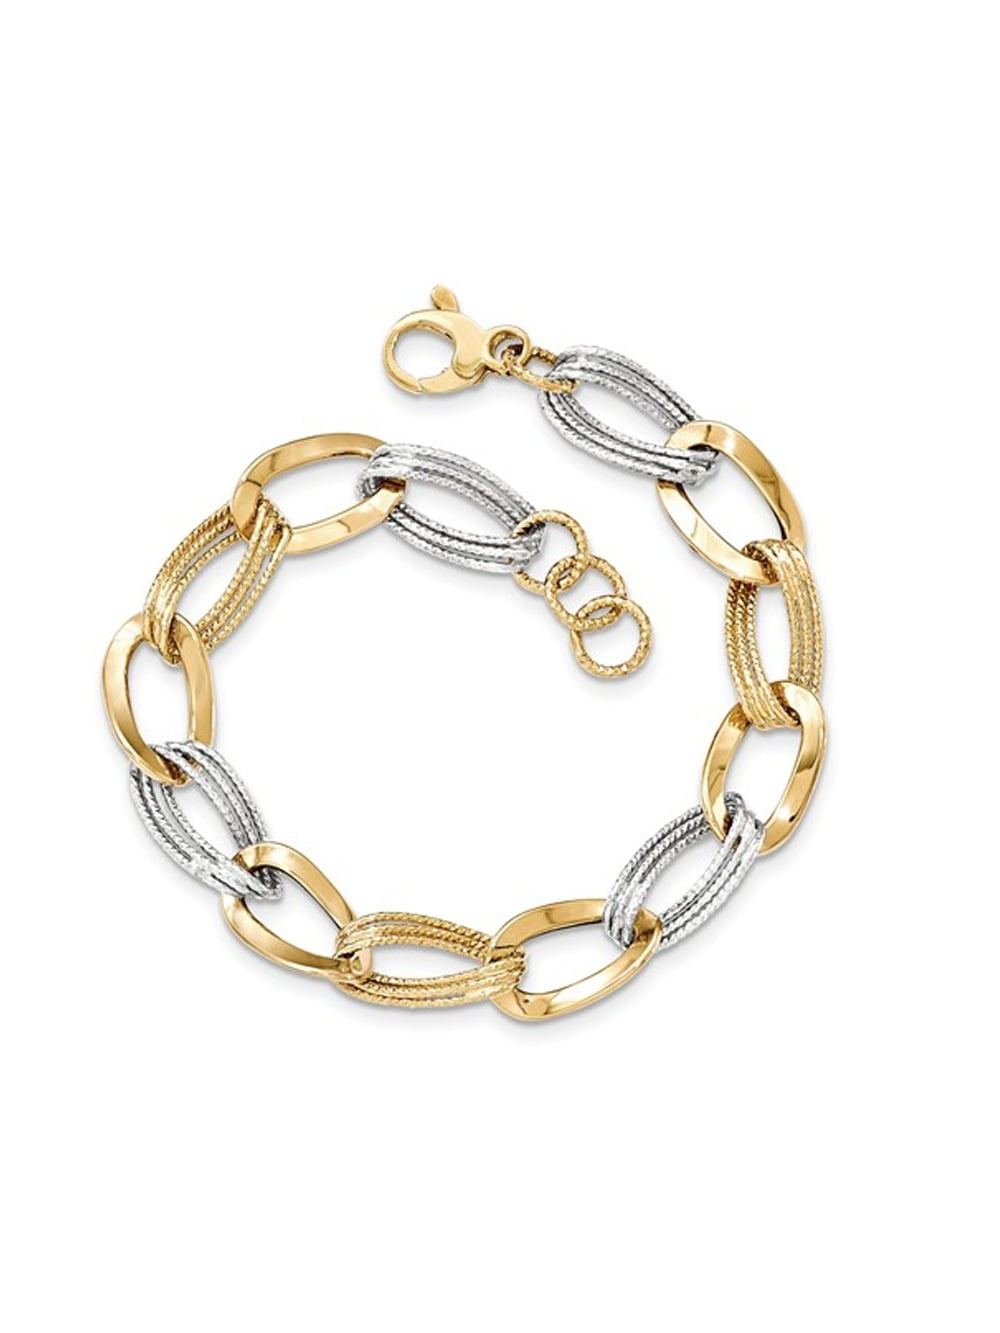 white and yellow gold bracelet